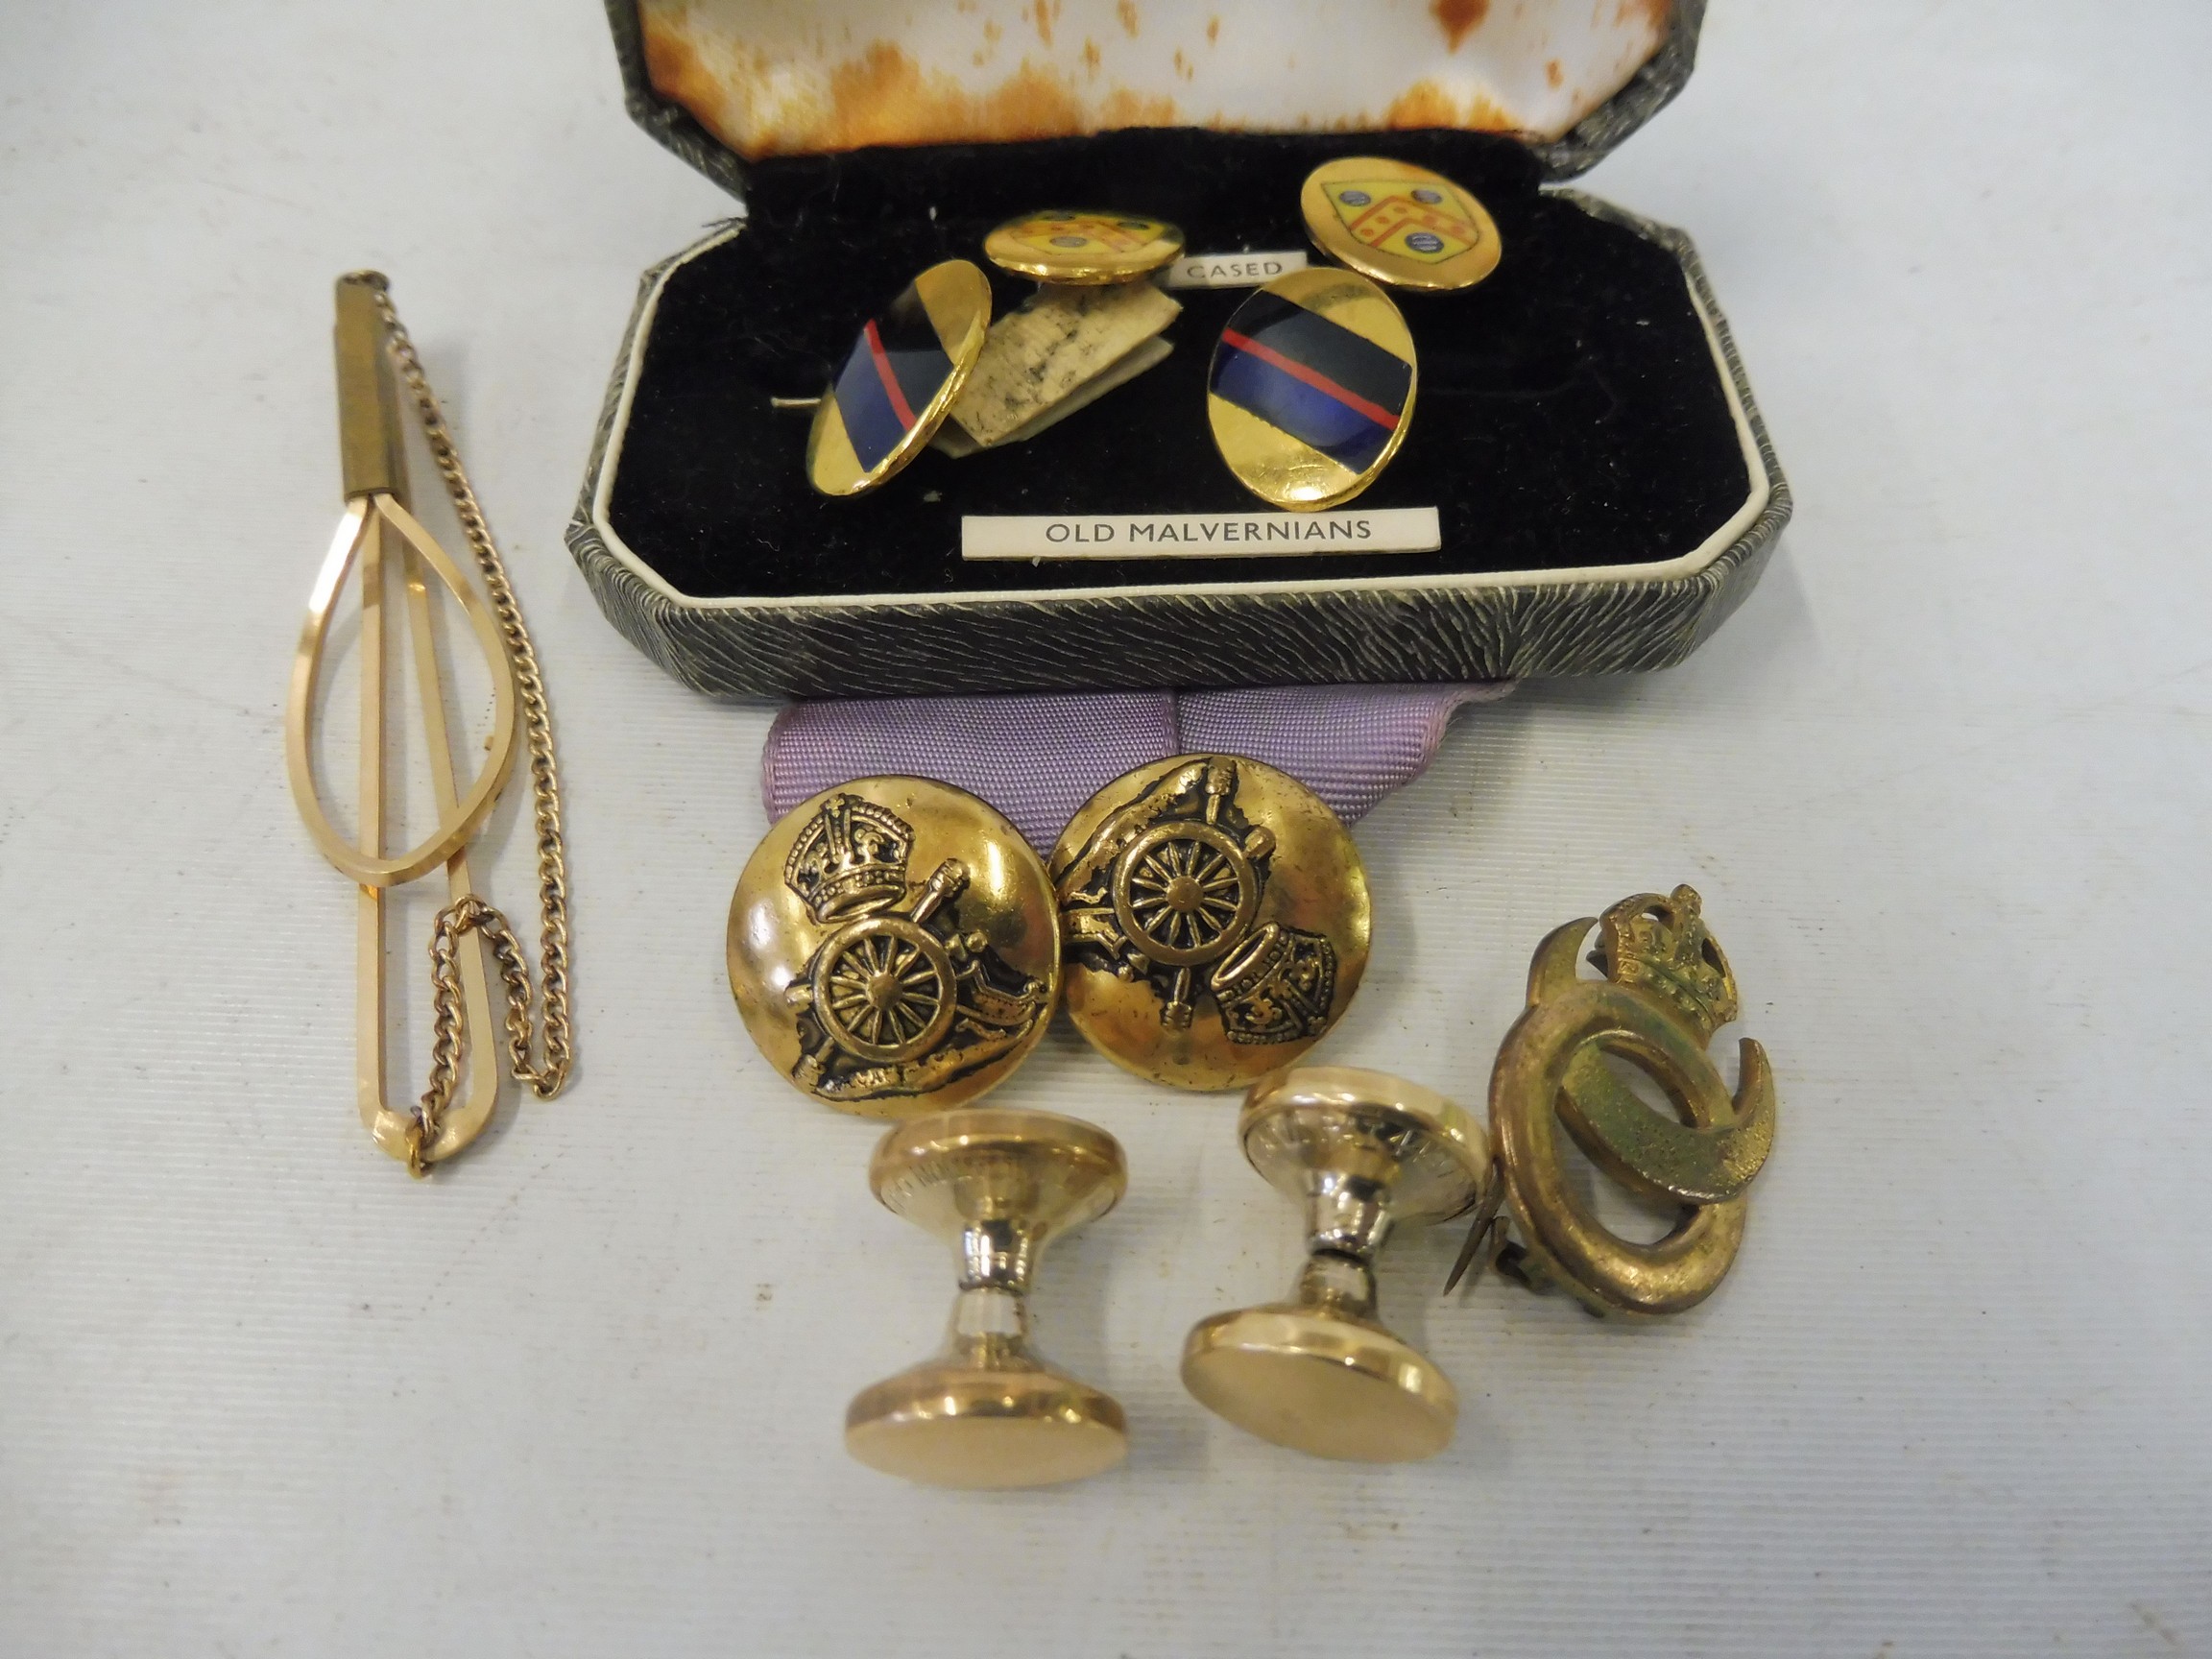 A cased pair of Old Malvernians part enamel cufflinks, another pair of yellow metal cufflinks and